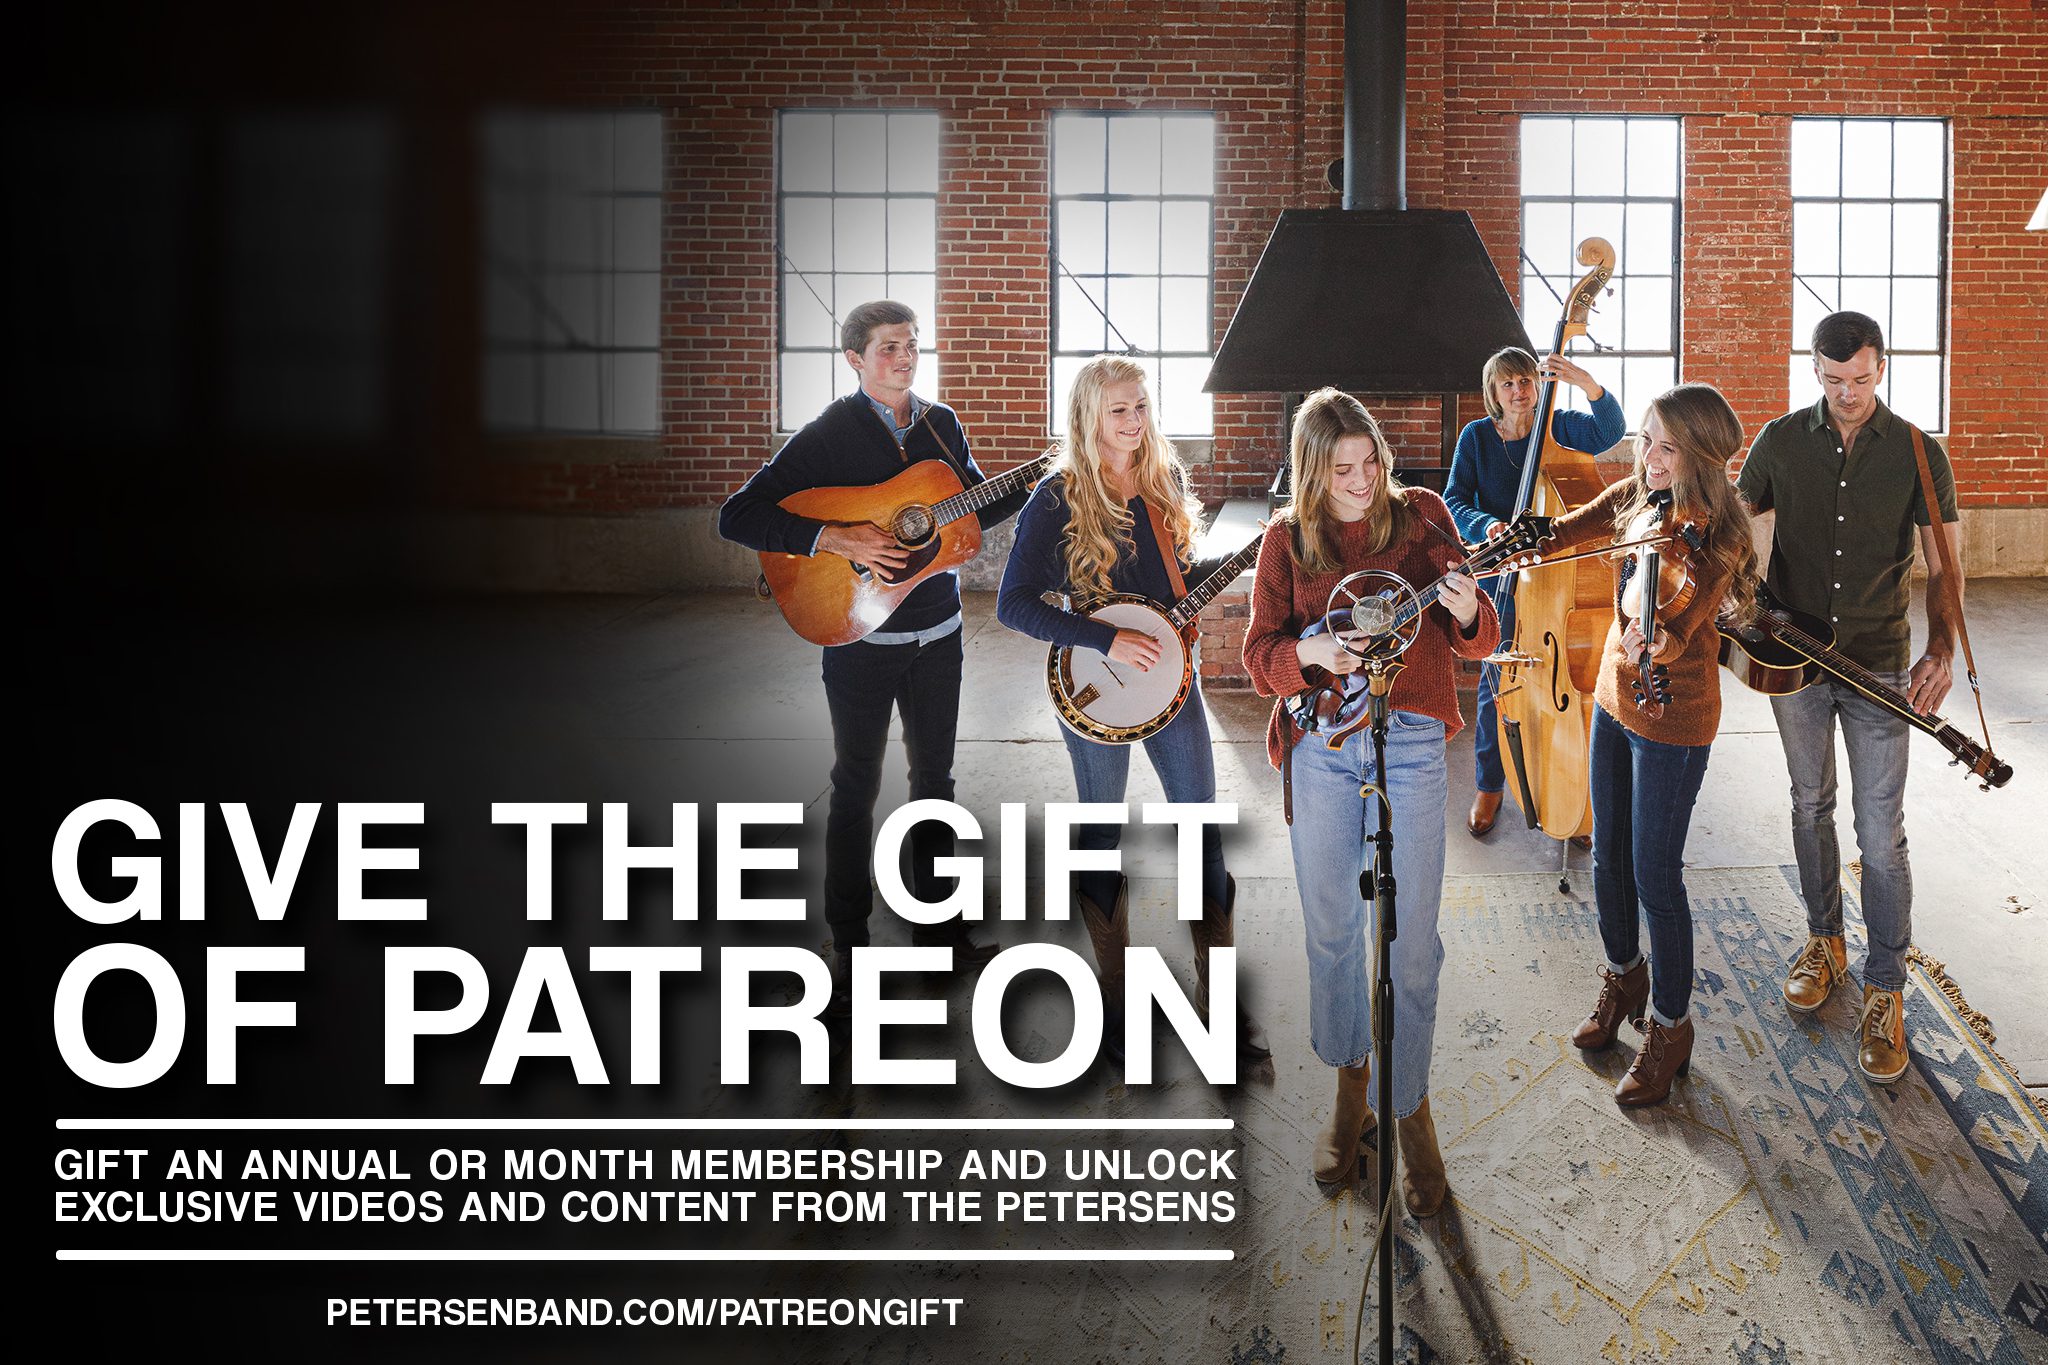 Give the gift of Patreon